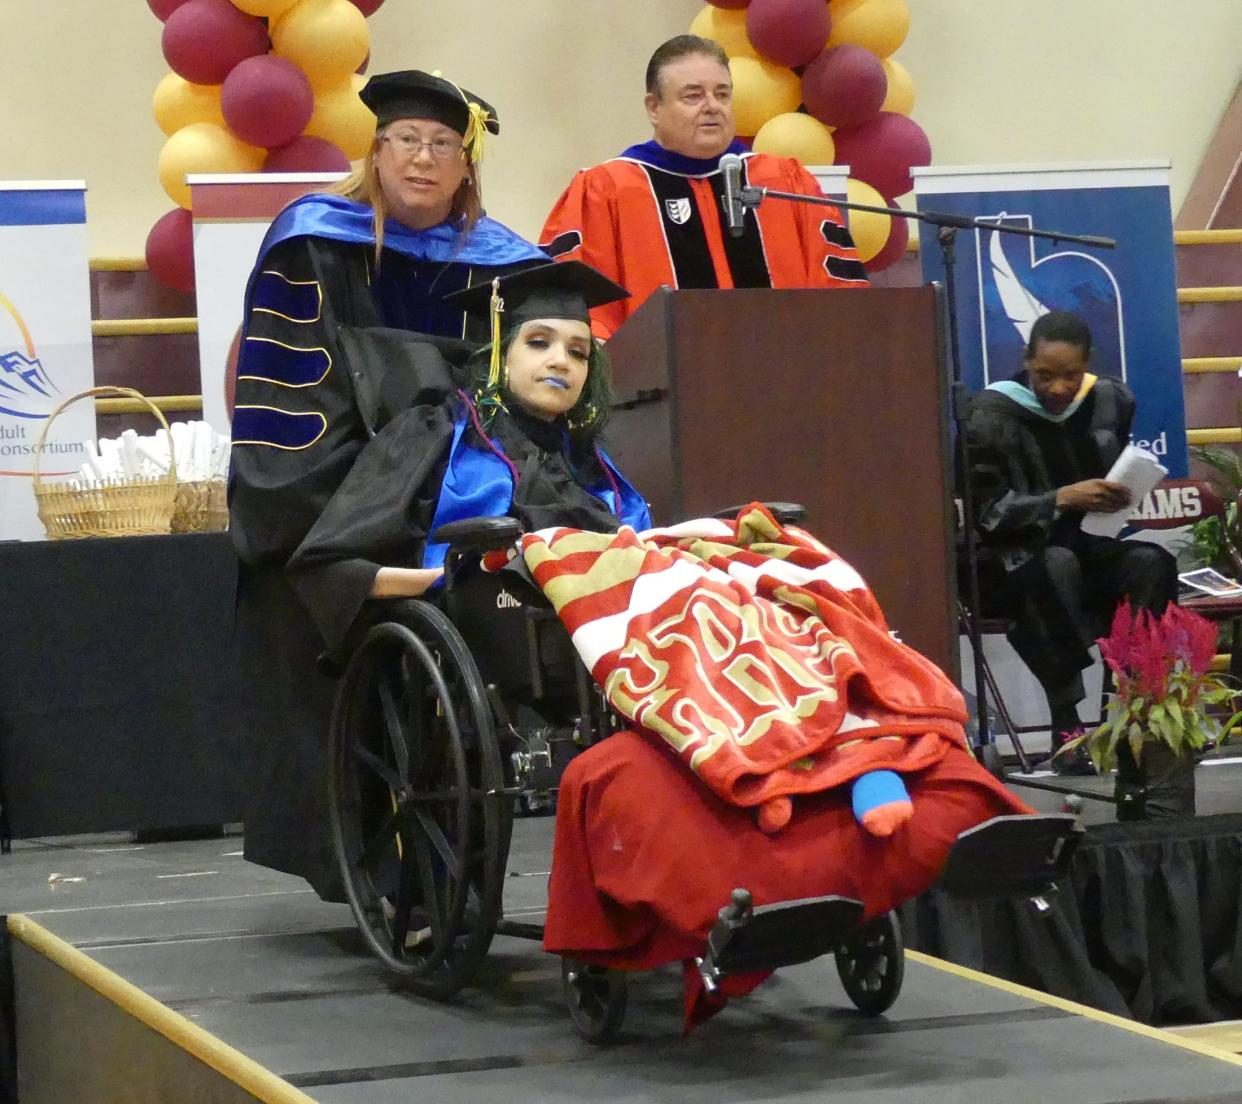 After being shot and paralyzed 18 years ago, Snowline Adult School Class speaker Shauntanay Davis, 30, proudly received her high school diploma during the Victor Valley Adult Education Regional Consortium’s 2022 Adult Education Graduation Ceremony.